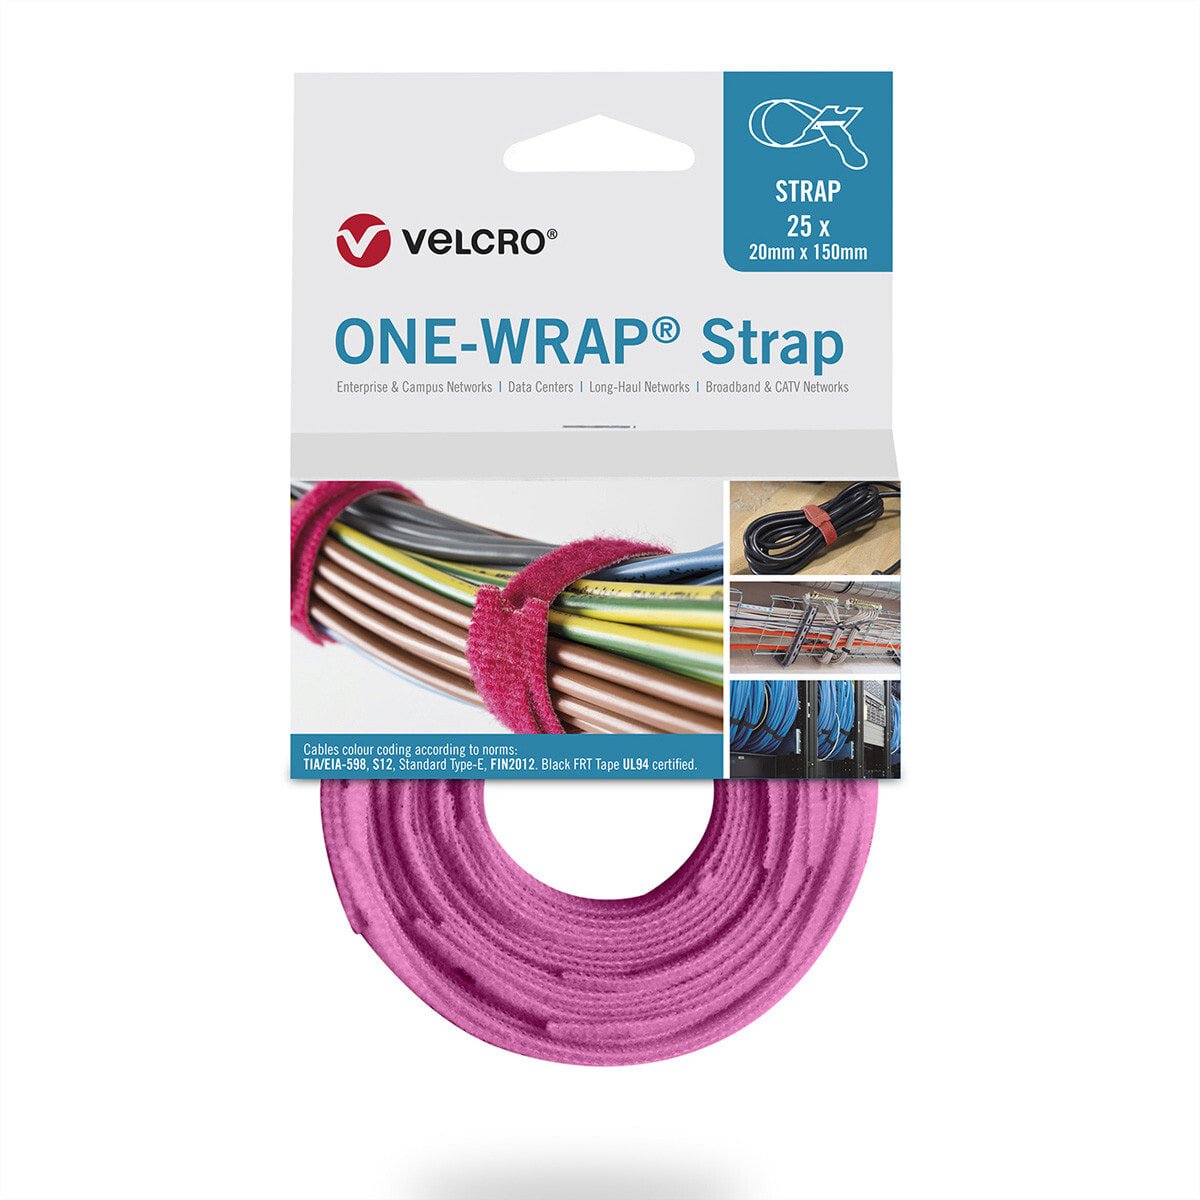 VELCRO ONE-WRAP - Releasable cable tie - Polypropylene (PP) -  - Pink - 330 mm - 20 mm - 25 pc(s)